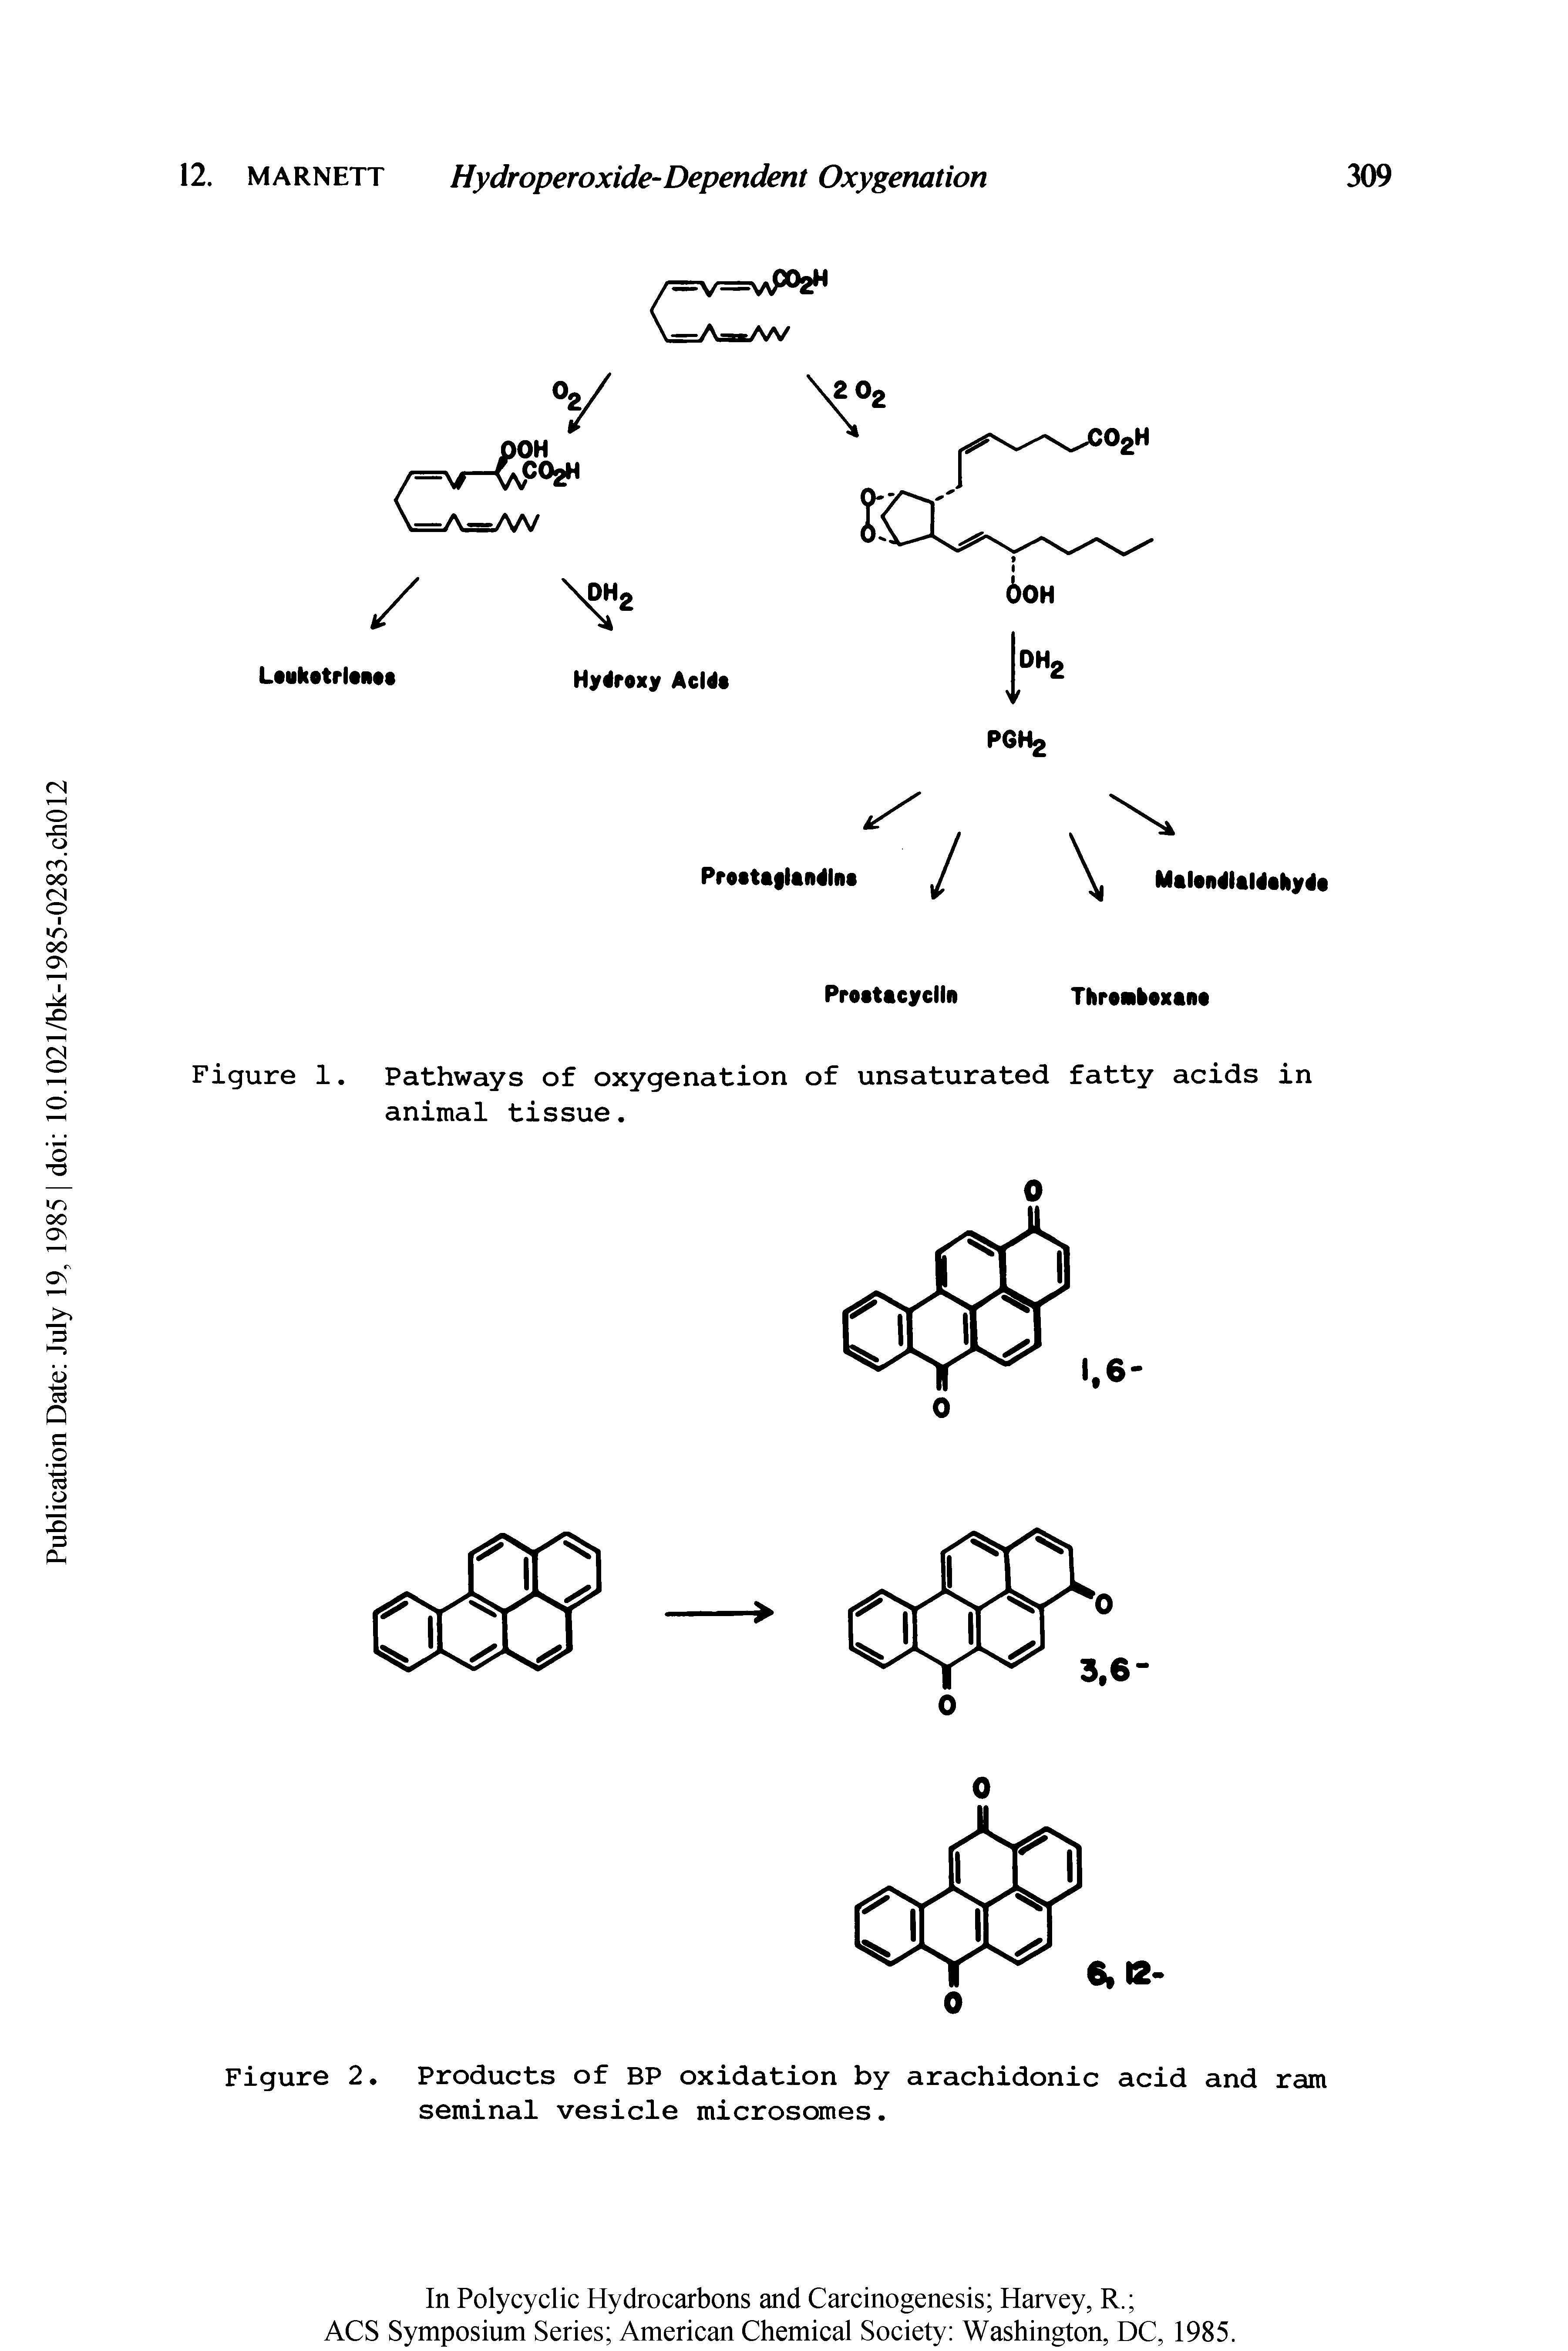 Figure 1. Pathways of oxygenation of unsaturated fatty acids in animal tissue.